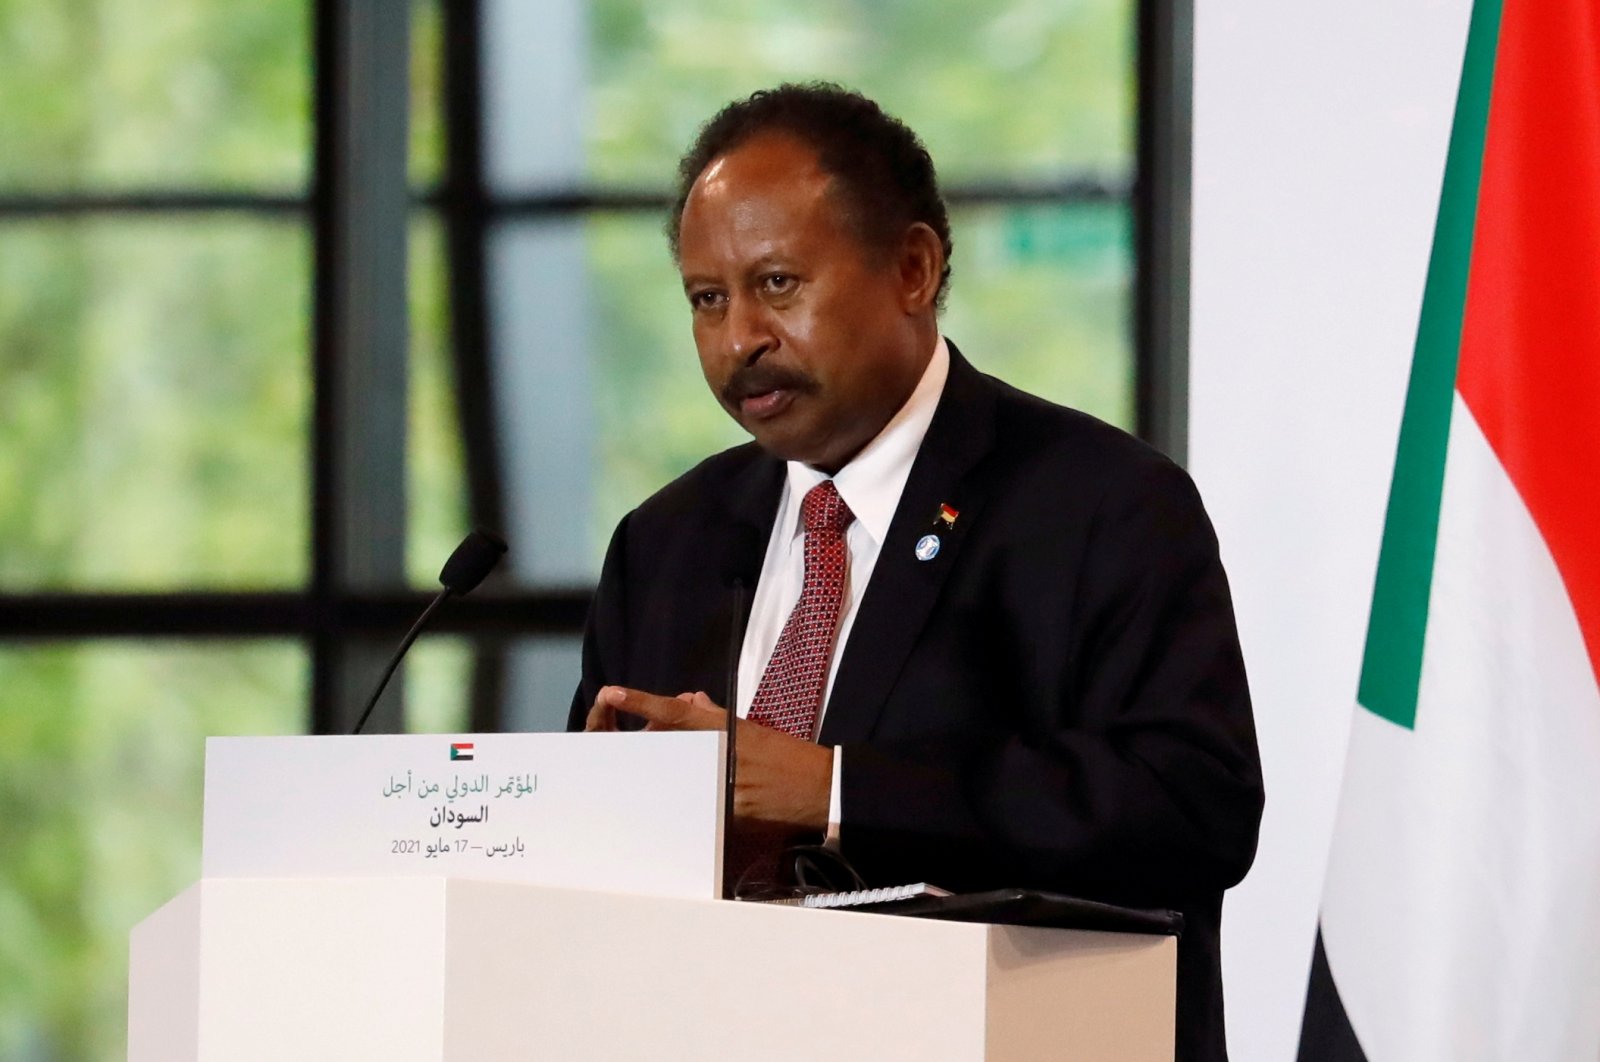 Sudan's Prime Minister Abdalla Hamdok attends a news conference during the International Conference in support of Sudan at the Temporary Grand Palais in Paris, France, May 17, 2021. (REUTERS File Photo)